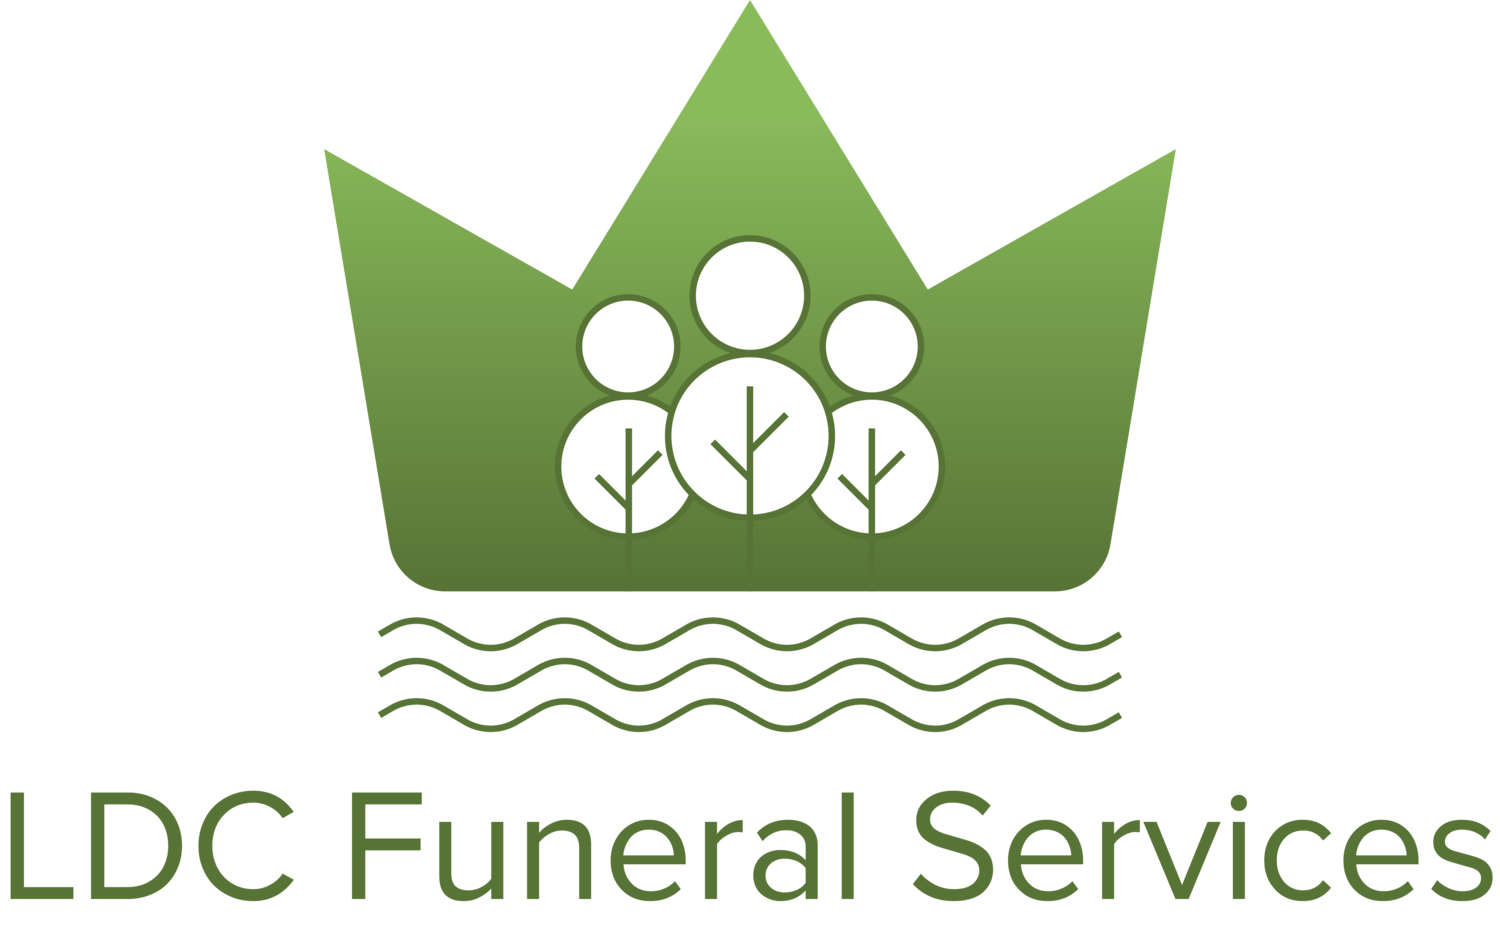 Logo of LDC Funeral Services Ltd Funeral Services In London